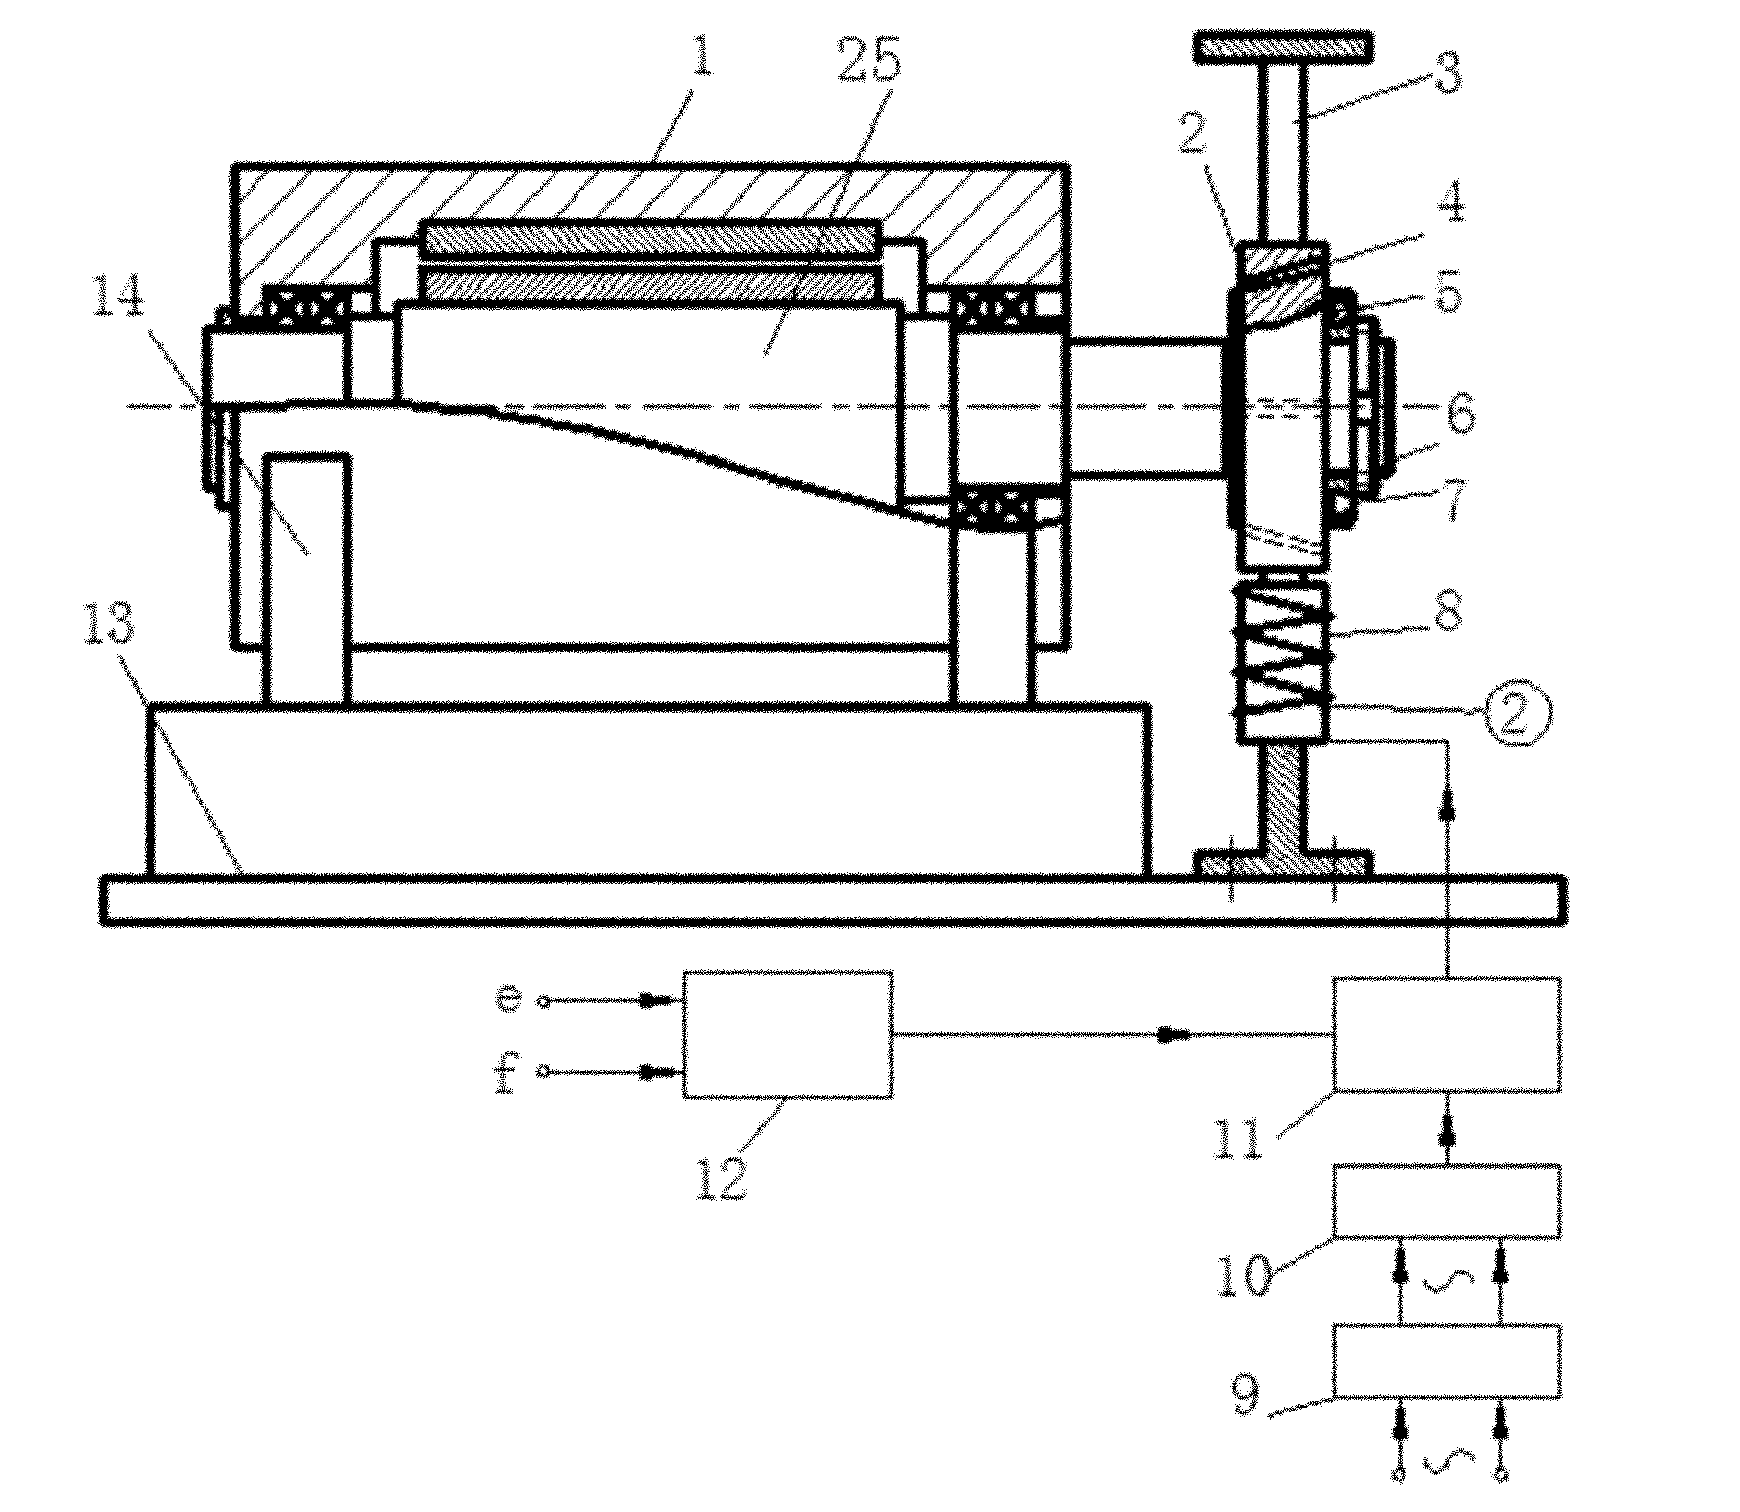 Non-contact electromagnetic loading device for high speed electric spindle